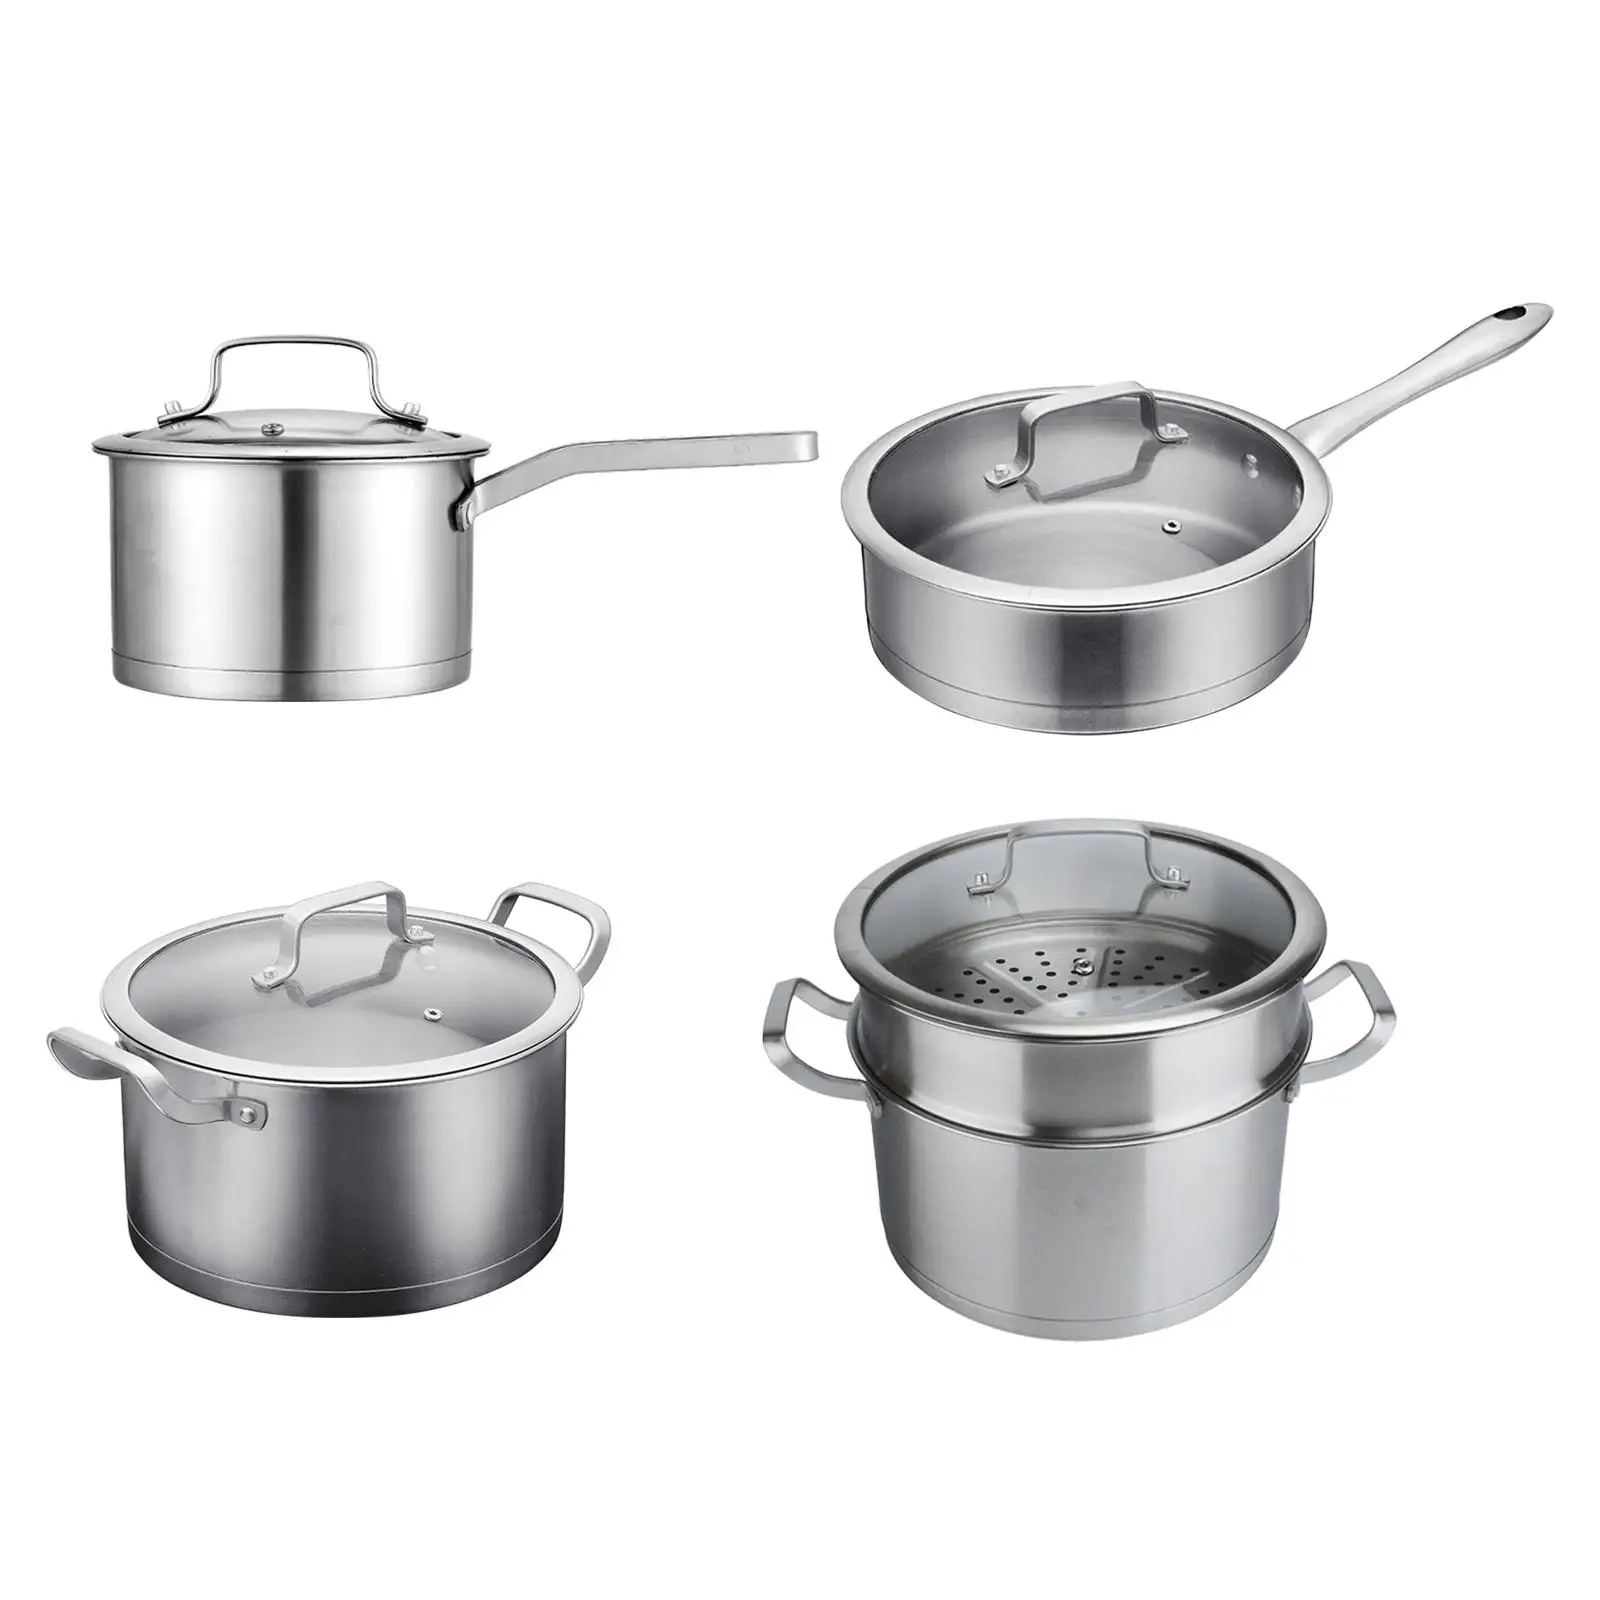 Kitchen Utensils with Glass Lids Frying Pan Portable Stockpot with Lid Soup Pot for Home Cafe Bar Restaurant Kitchen Countertop